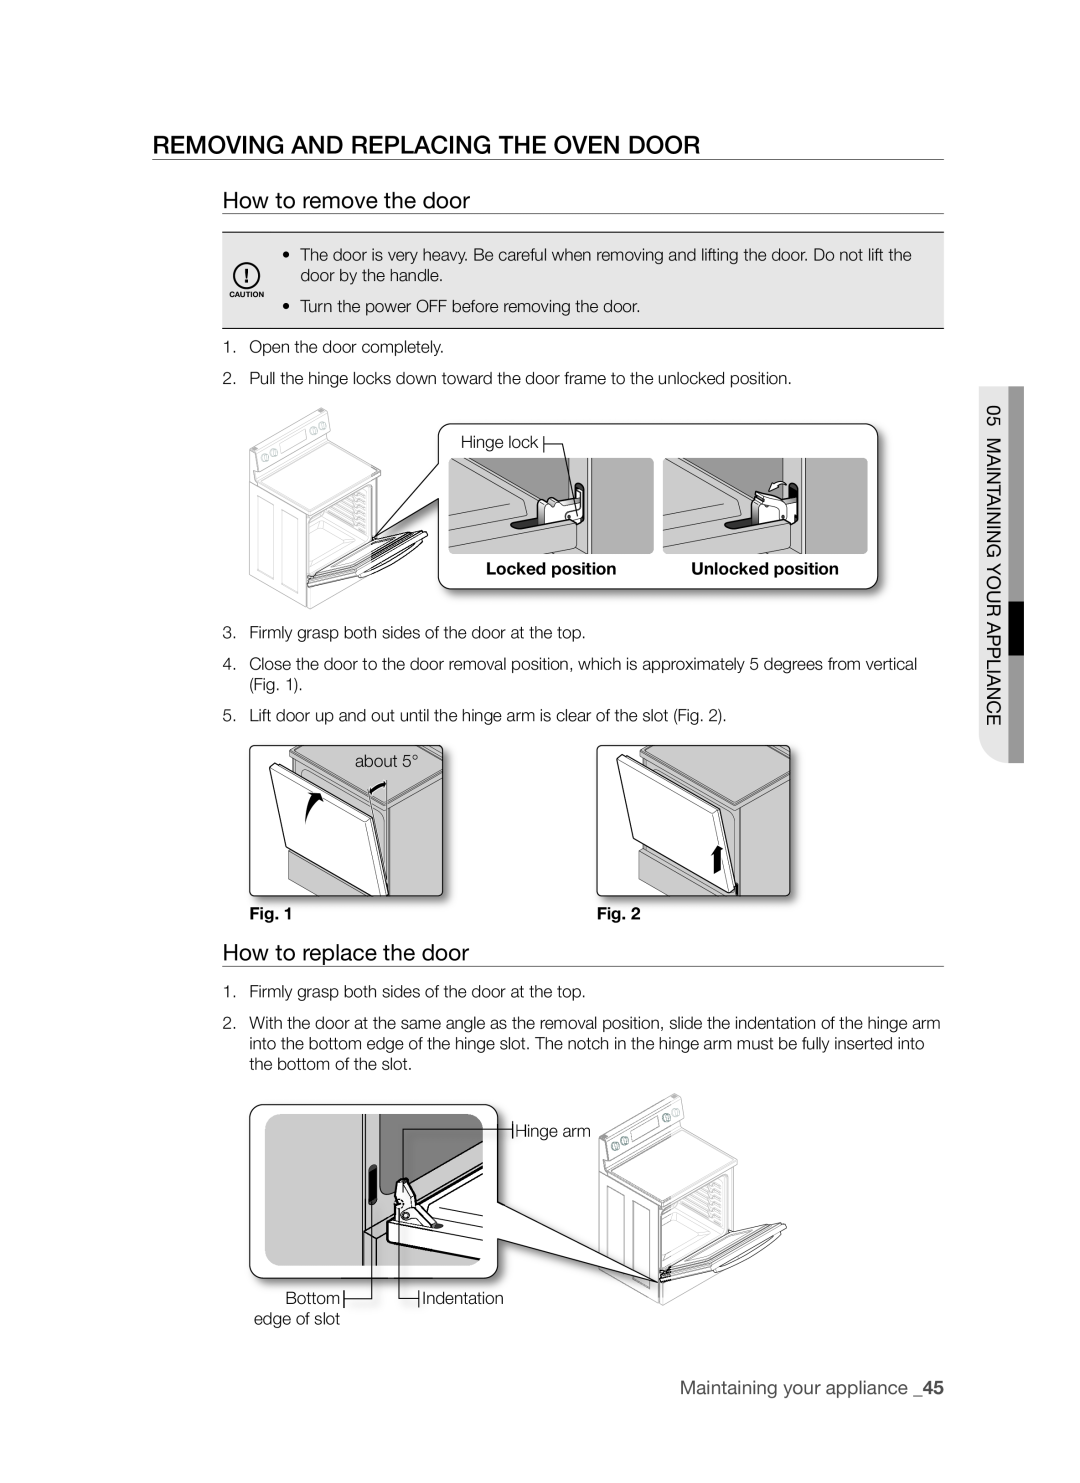 Samsung FTQ353 user manual Removing And Replacing The Oven Door, How to remove the door, How to replace the door 